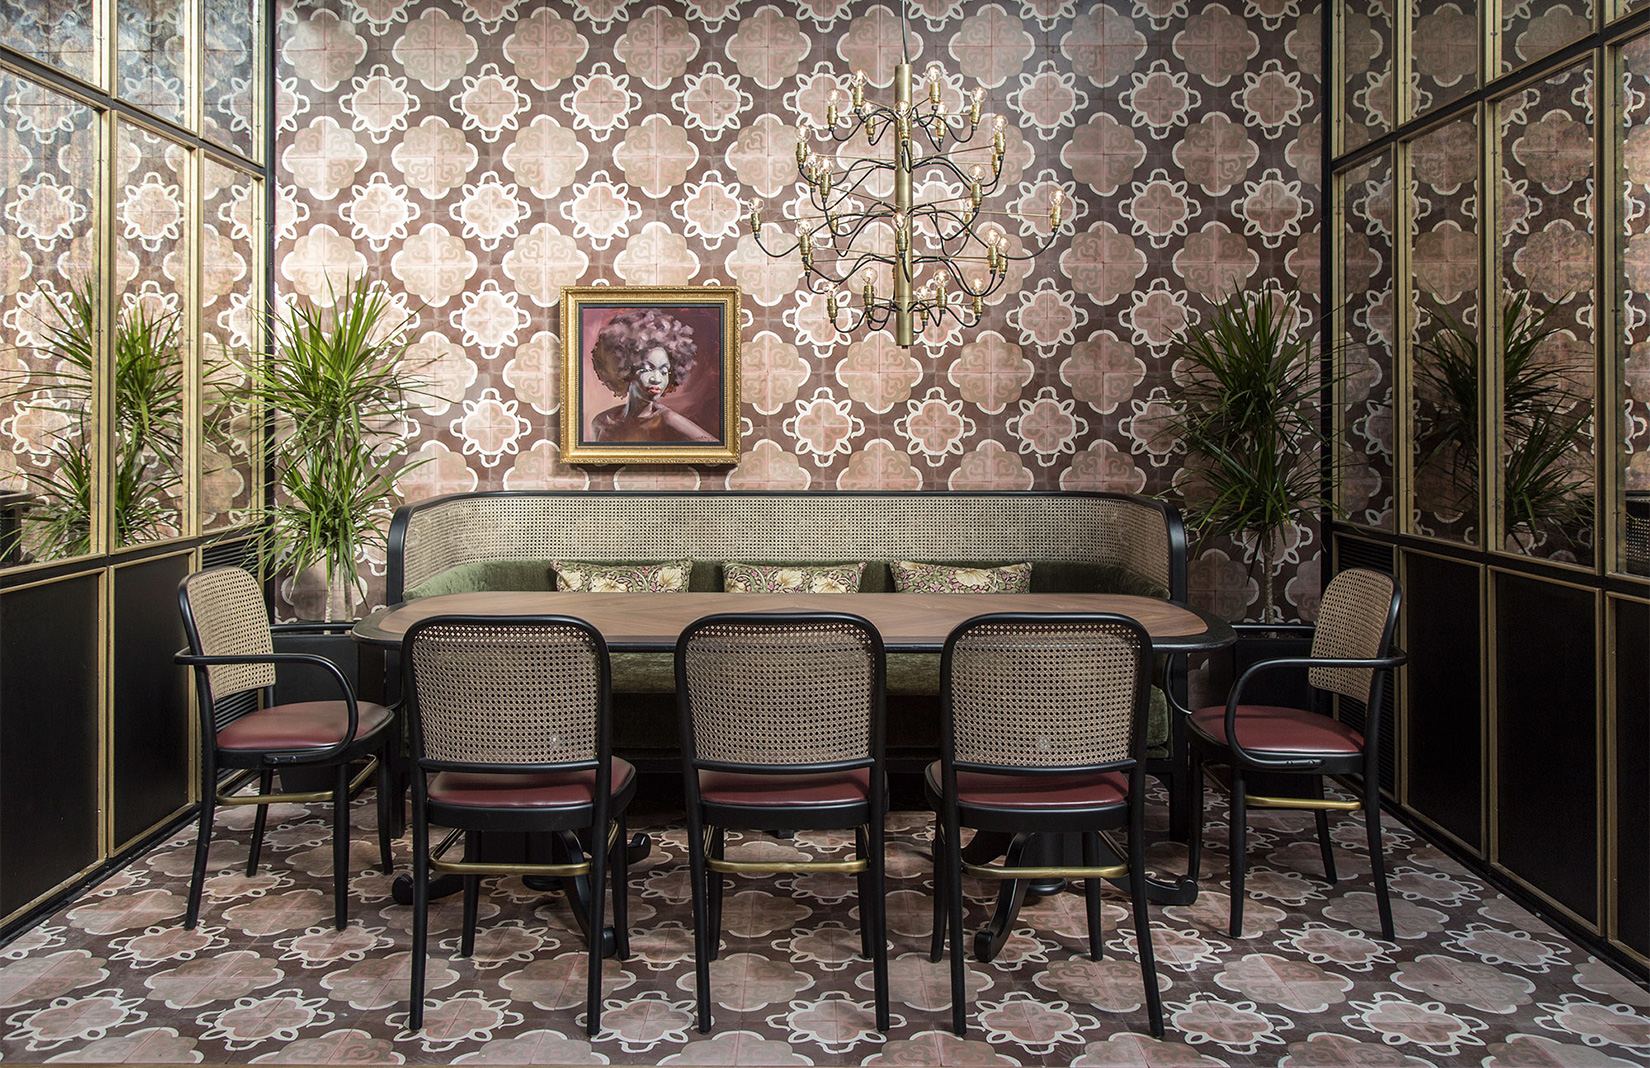 Minos Kosmidis designed the interiors for new Athens bar and restaurant Papillon which channels a 19th-century Parisian vibe.